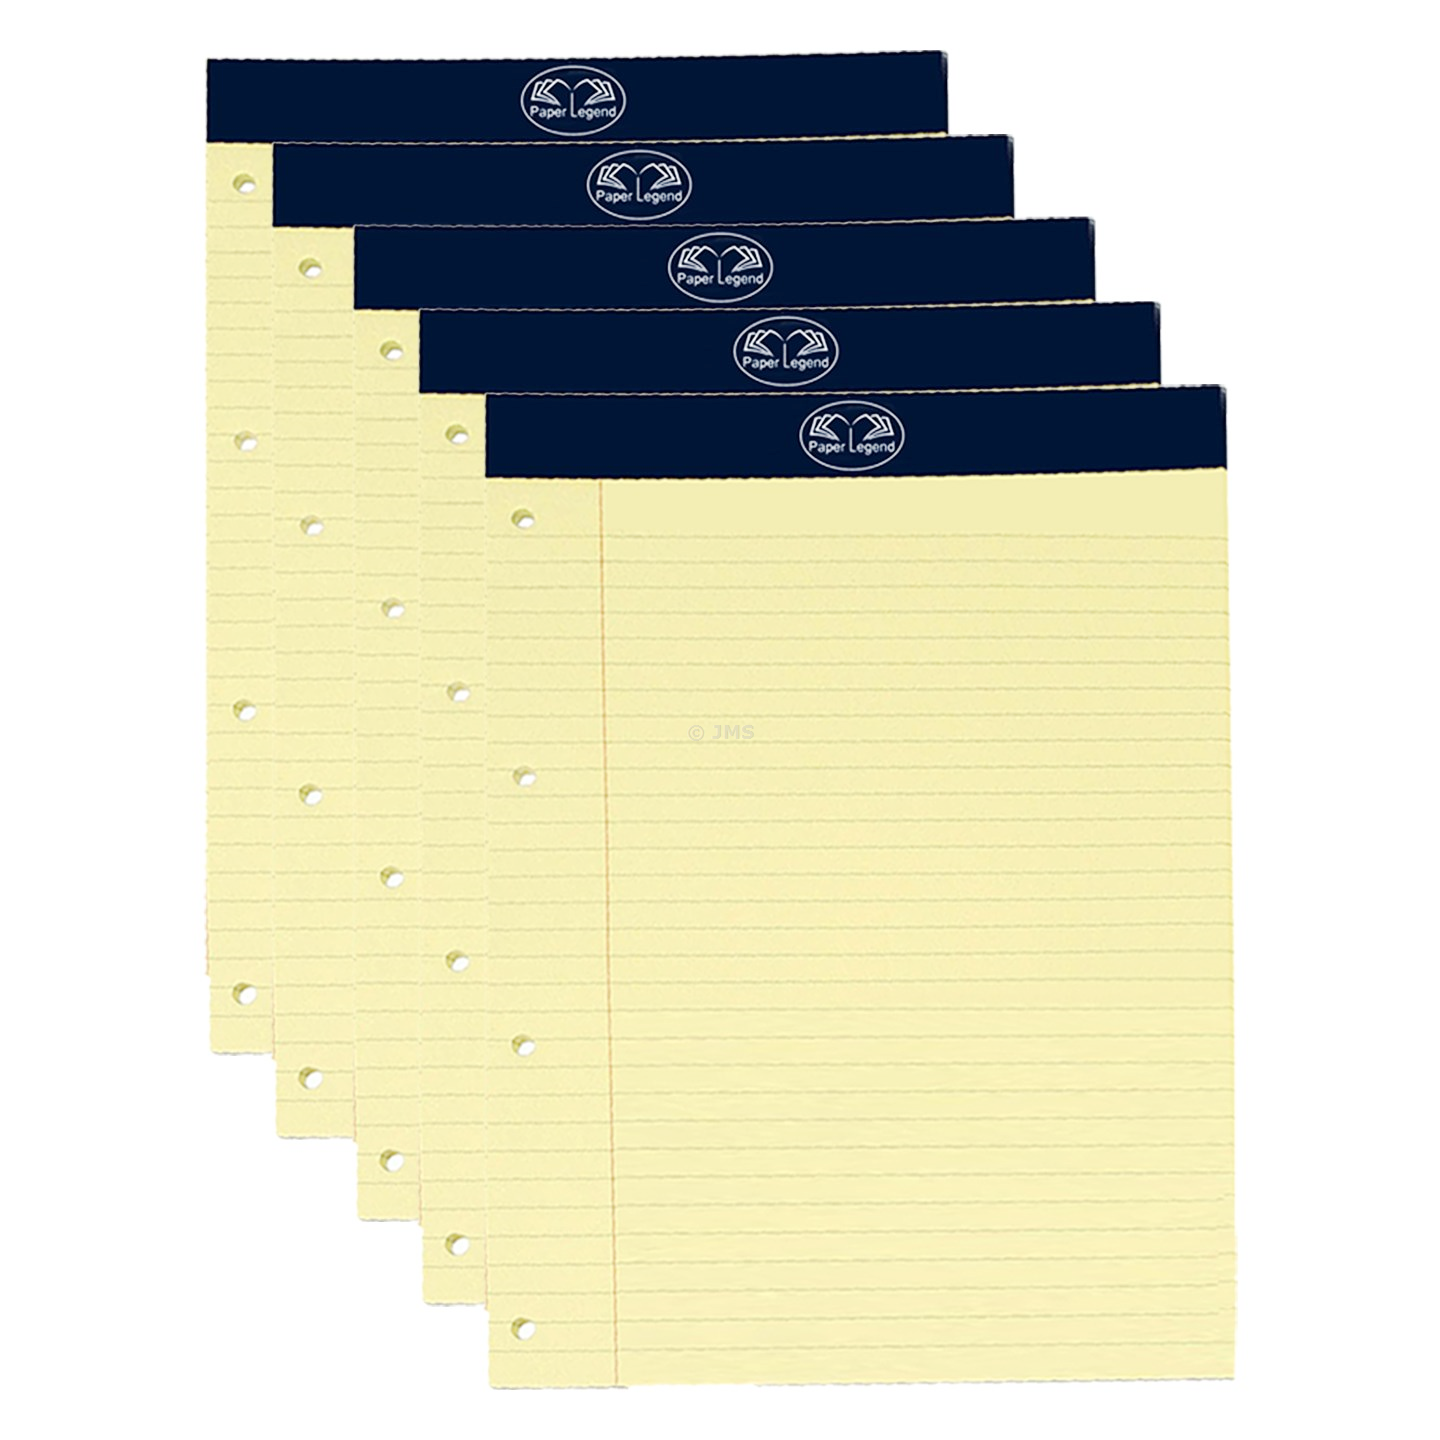 [Set of 5] A4 Yellow Executive Legal Pad 50 Sheets Feint Ruled 80 gsm Paper Pre-Punched Holes Top Bound Notepad